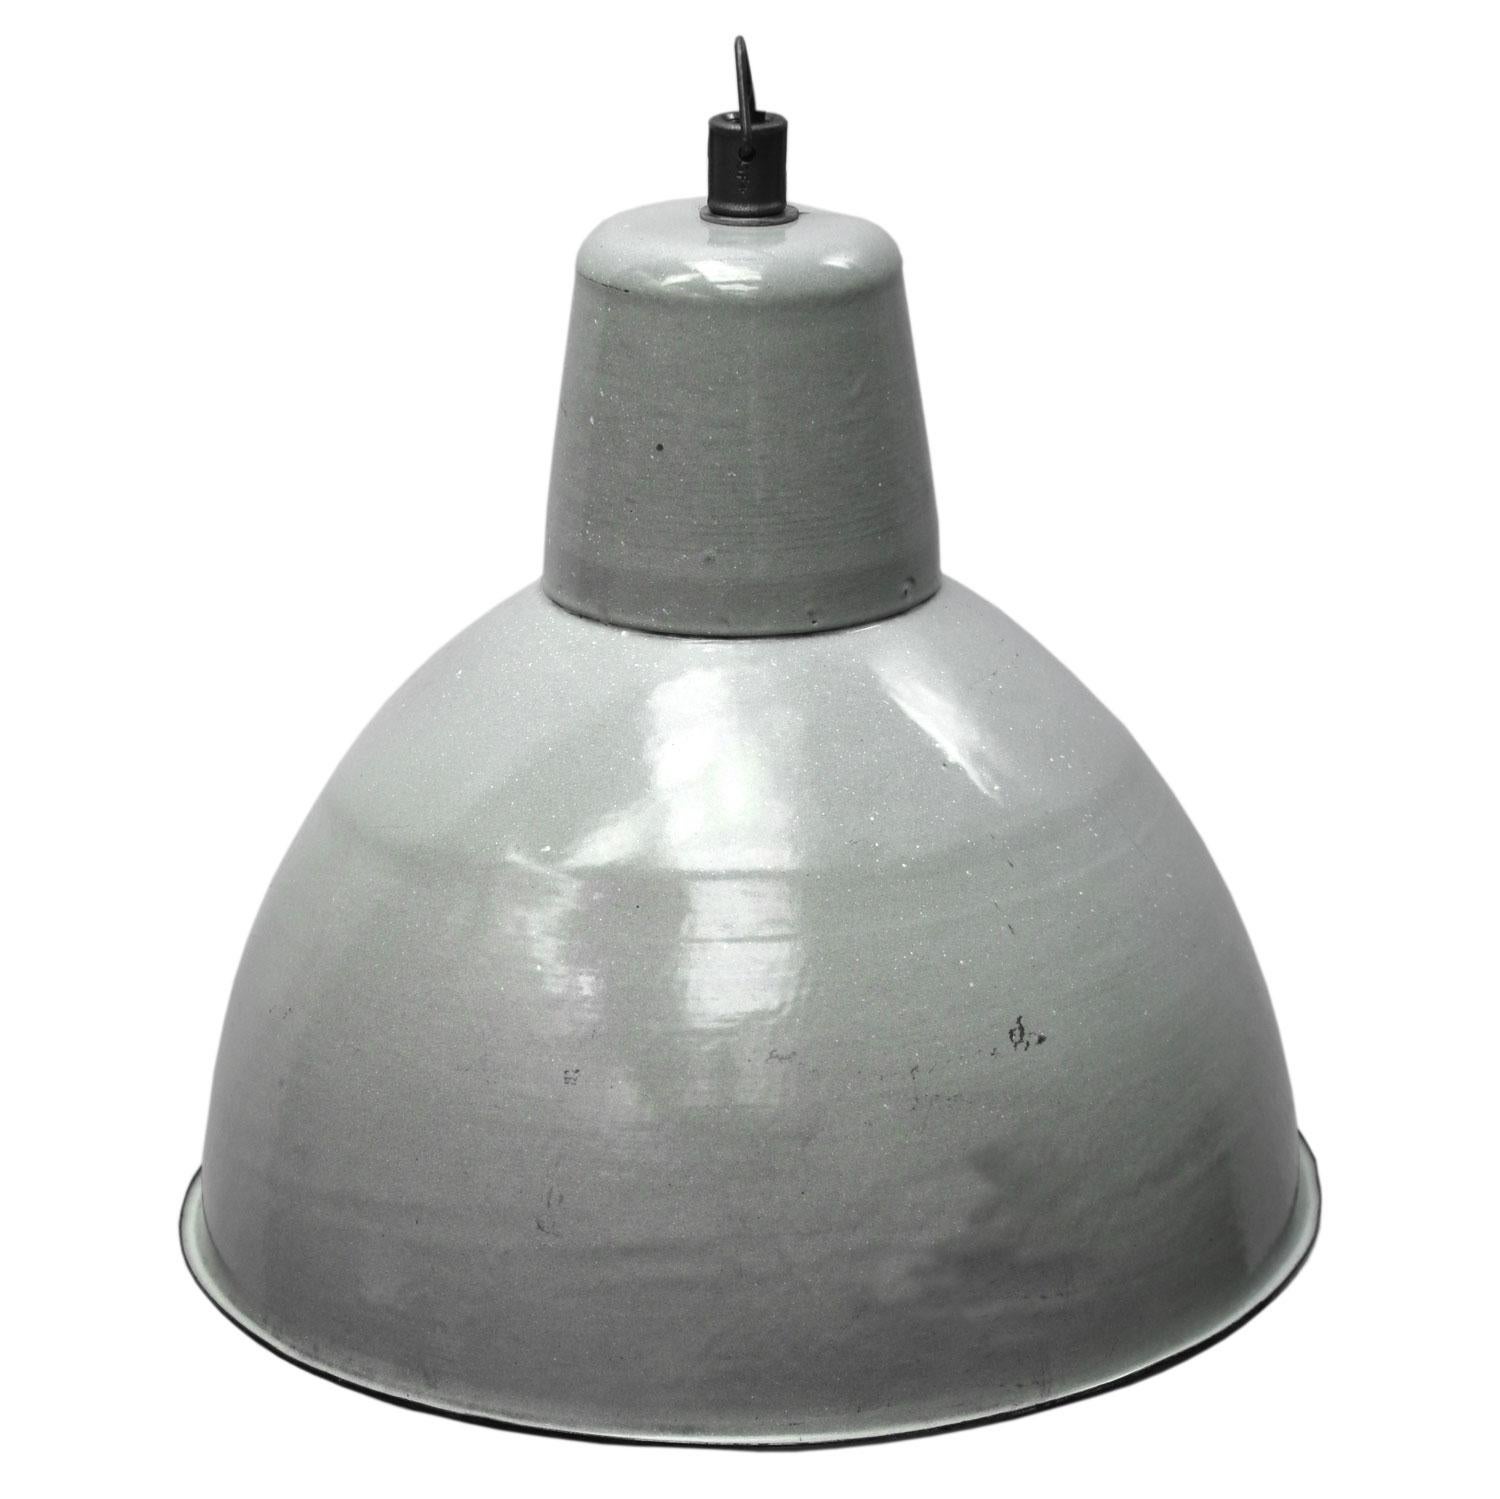 Industrial hanging light
gray enamel white interior

Weight: 2.80 kg / 6.2 lb

Priced per individual item. All lamps have been made suitable by international standards for incandescent light bulbs, energy-efficient and LED bulbs. E26/E27 bulb